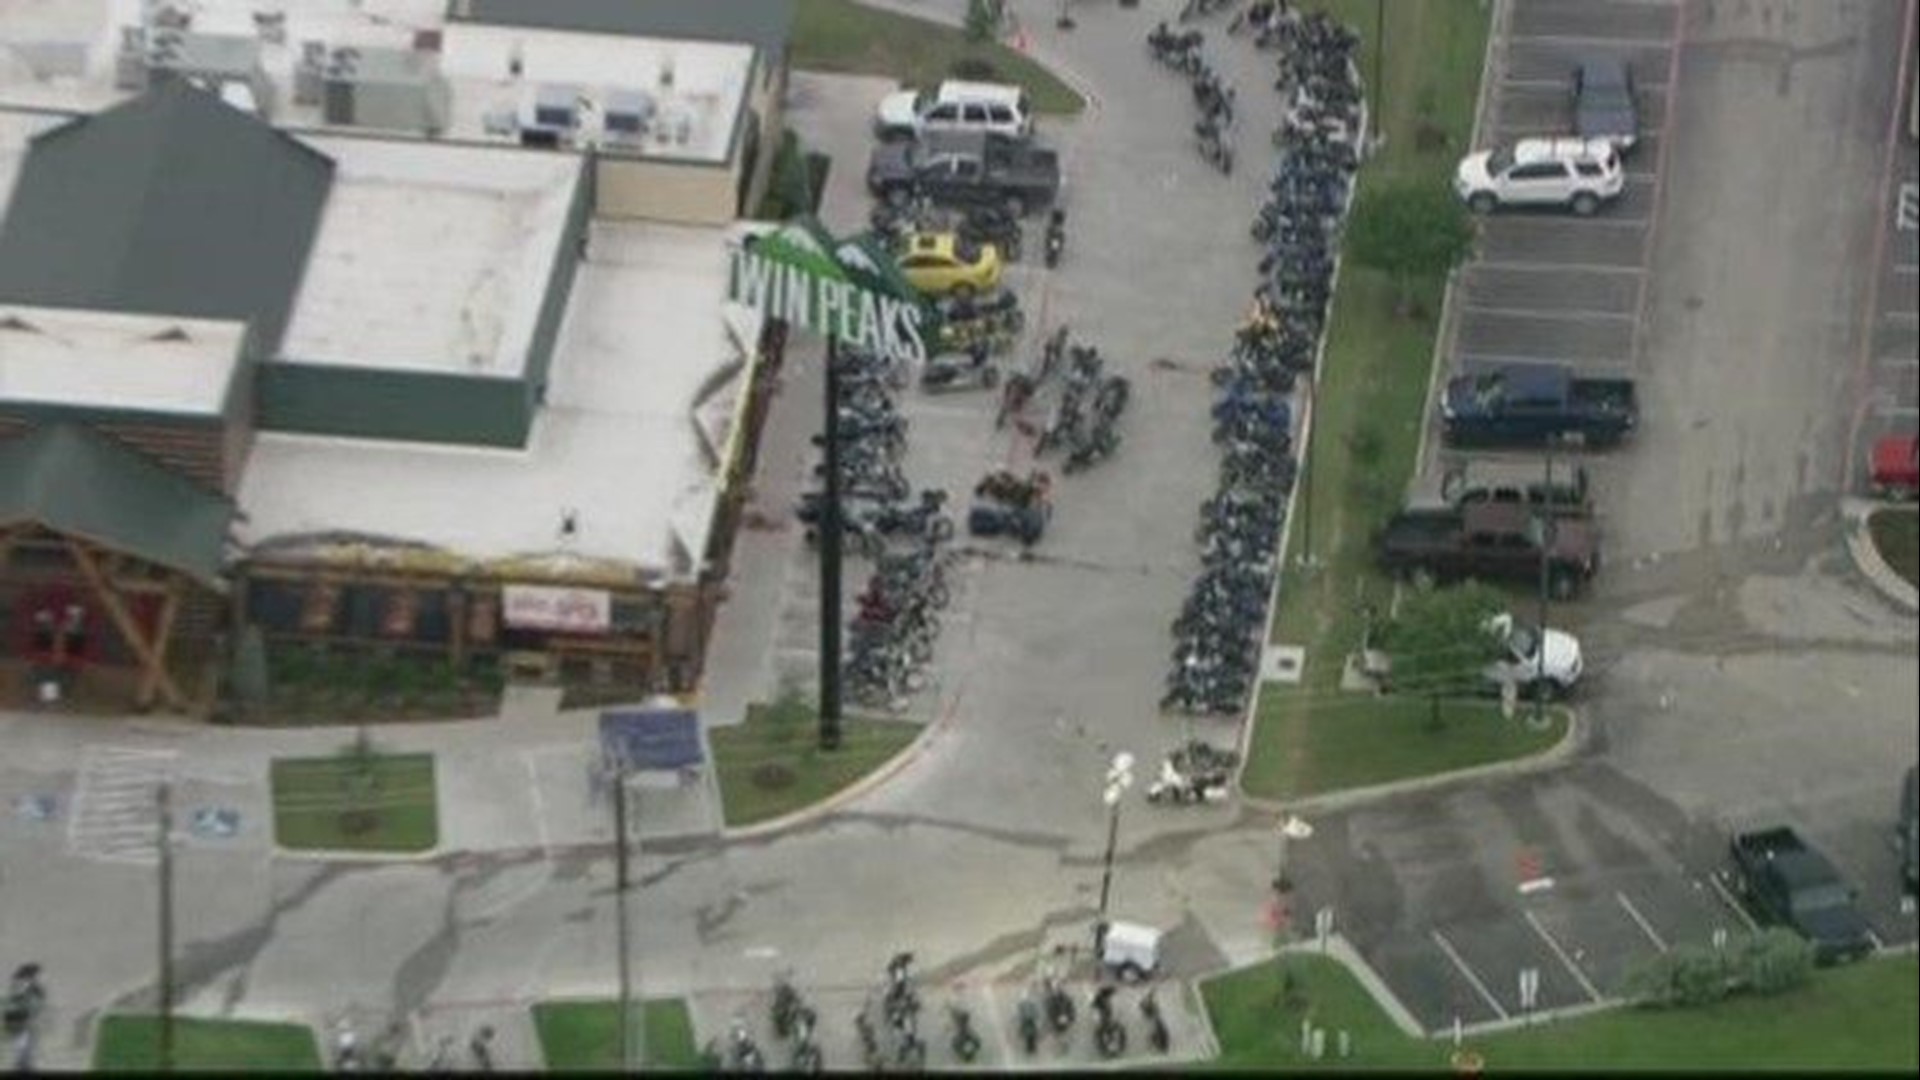 New McLennan County District Attorney Barry Johnson announced Tuesday all 24 of the cases against bikers involved in the Twin Peaks shootout would be dismissed.